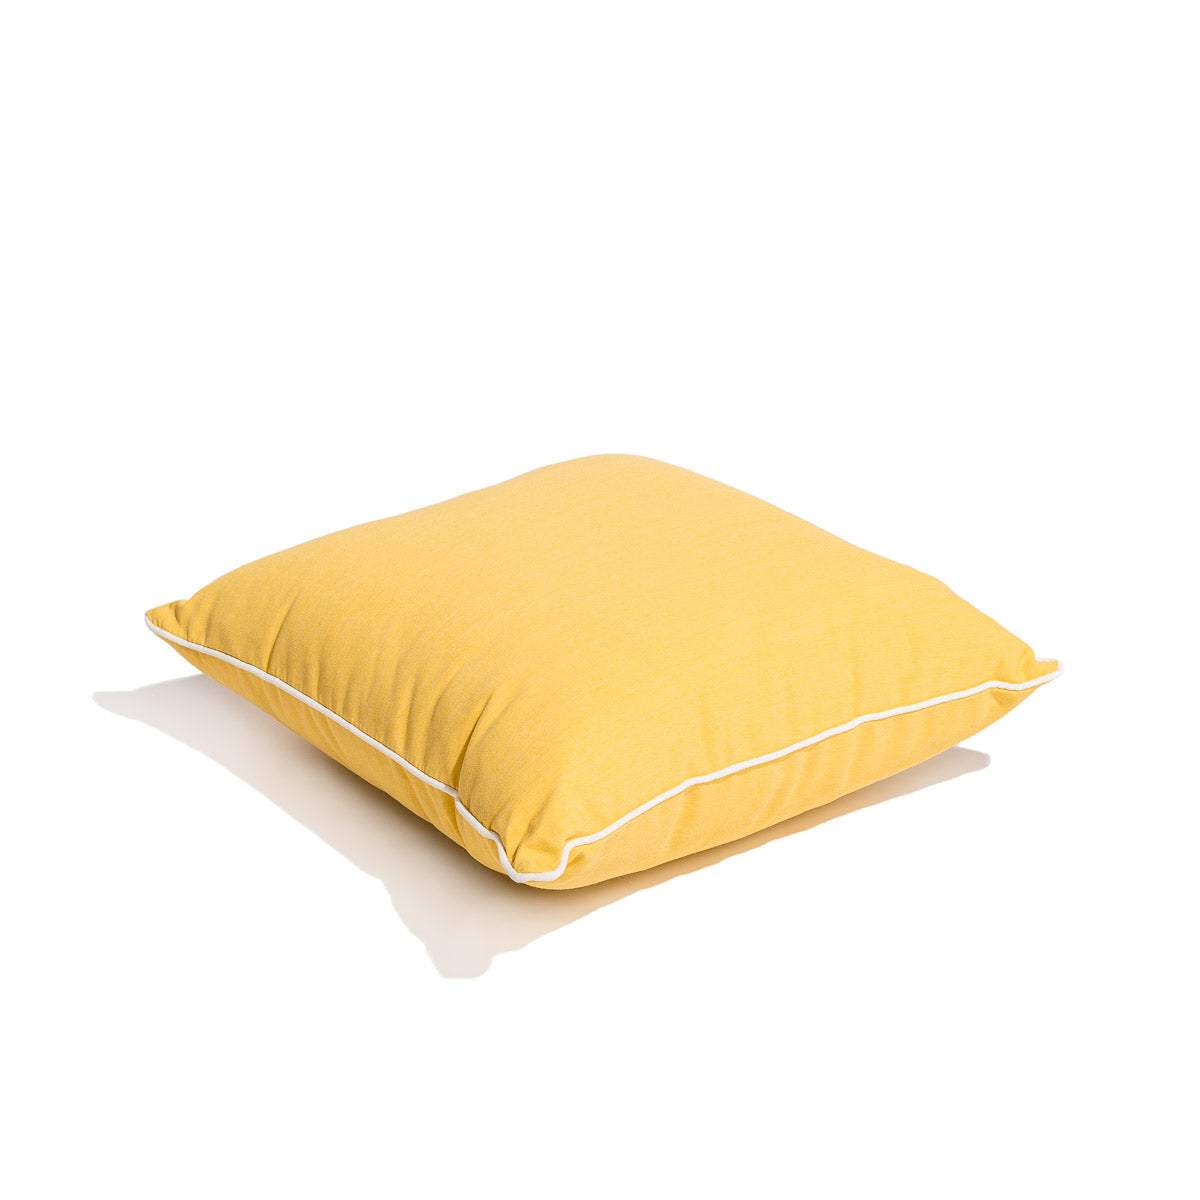 The Small Square Throw Pillow - Rivie Mimosa